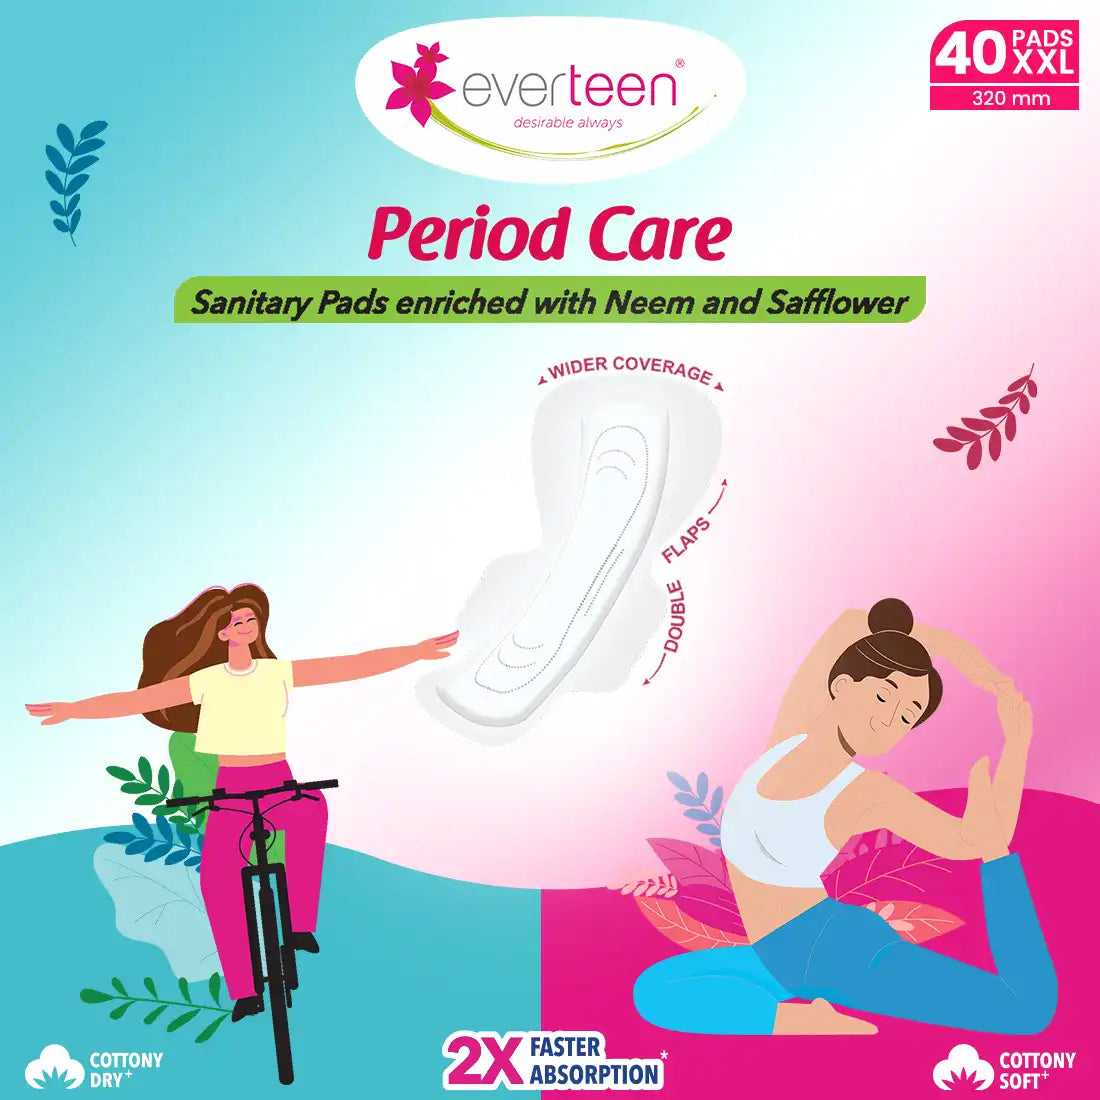 everteen Period Care XXL Neem-Safflower Sanitary Pads with Double Wings - 40 Pads, 320mm - everteen